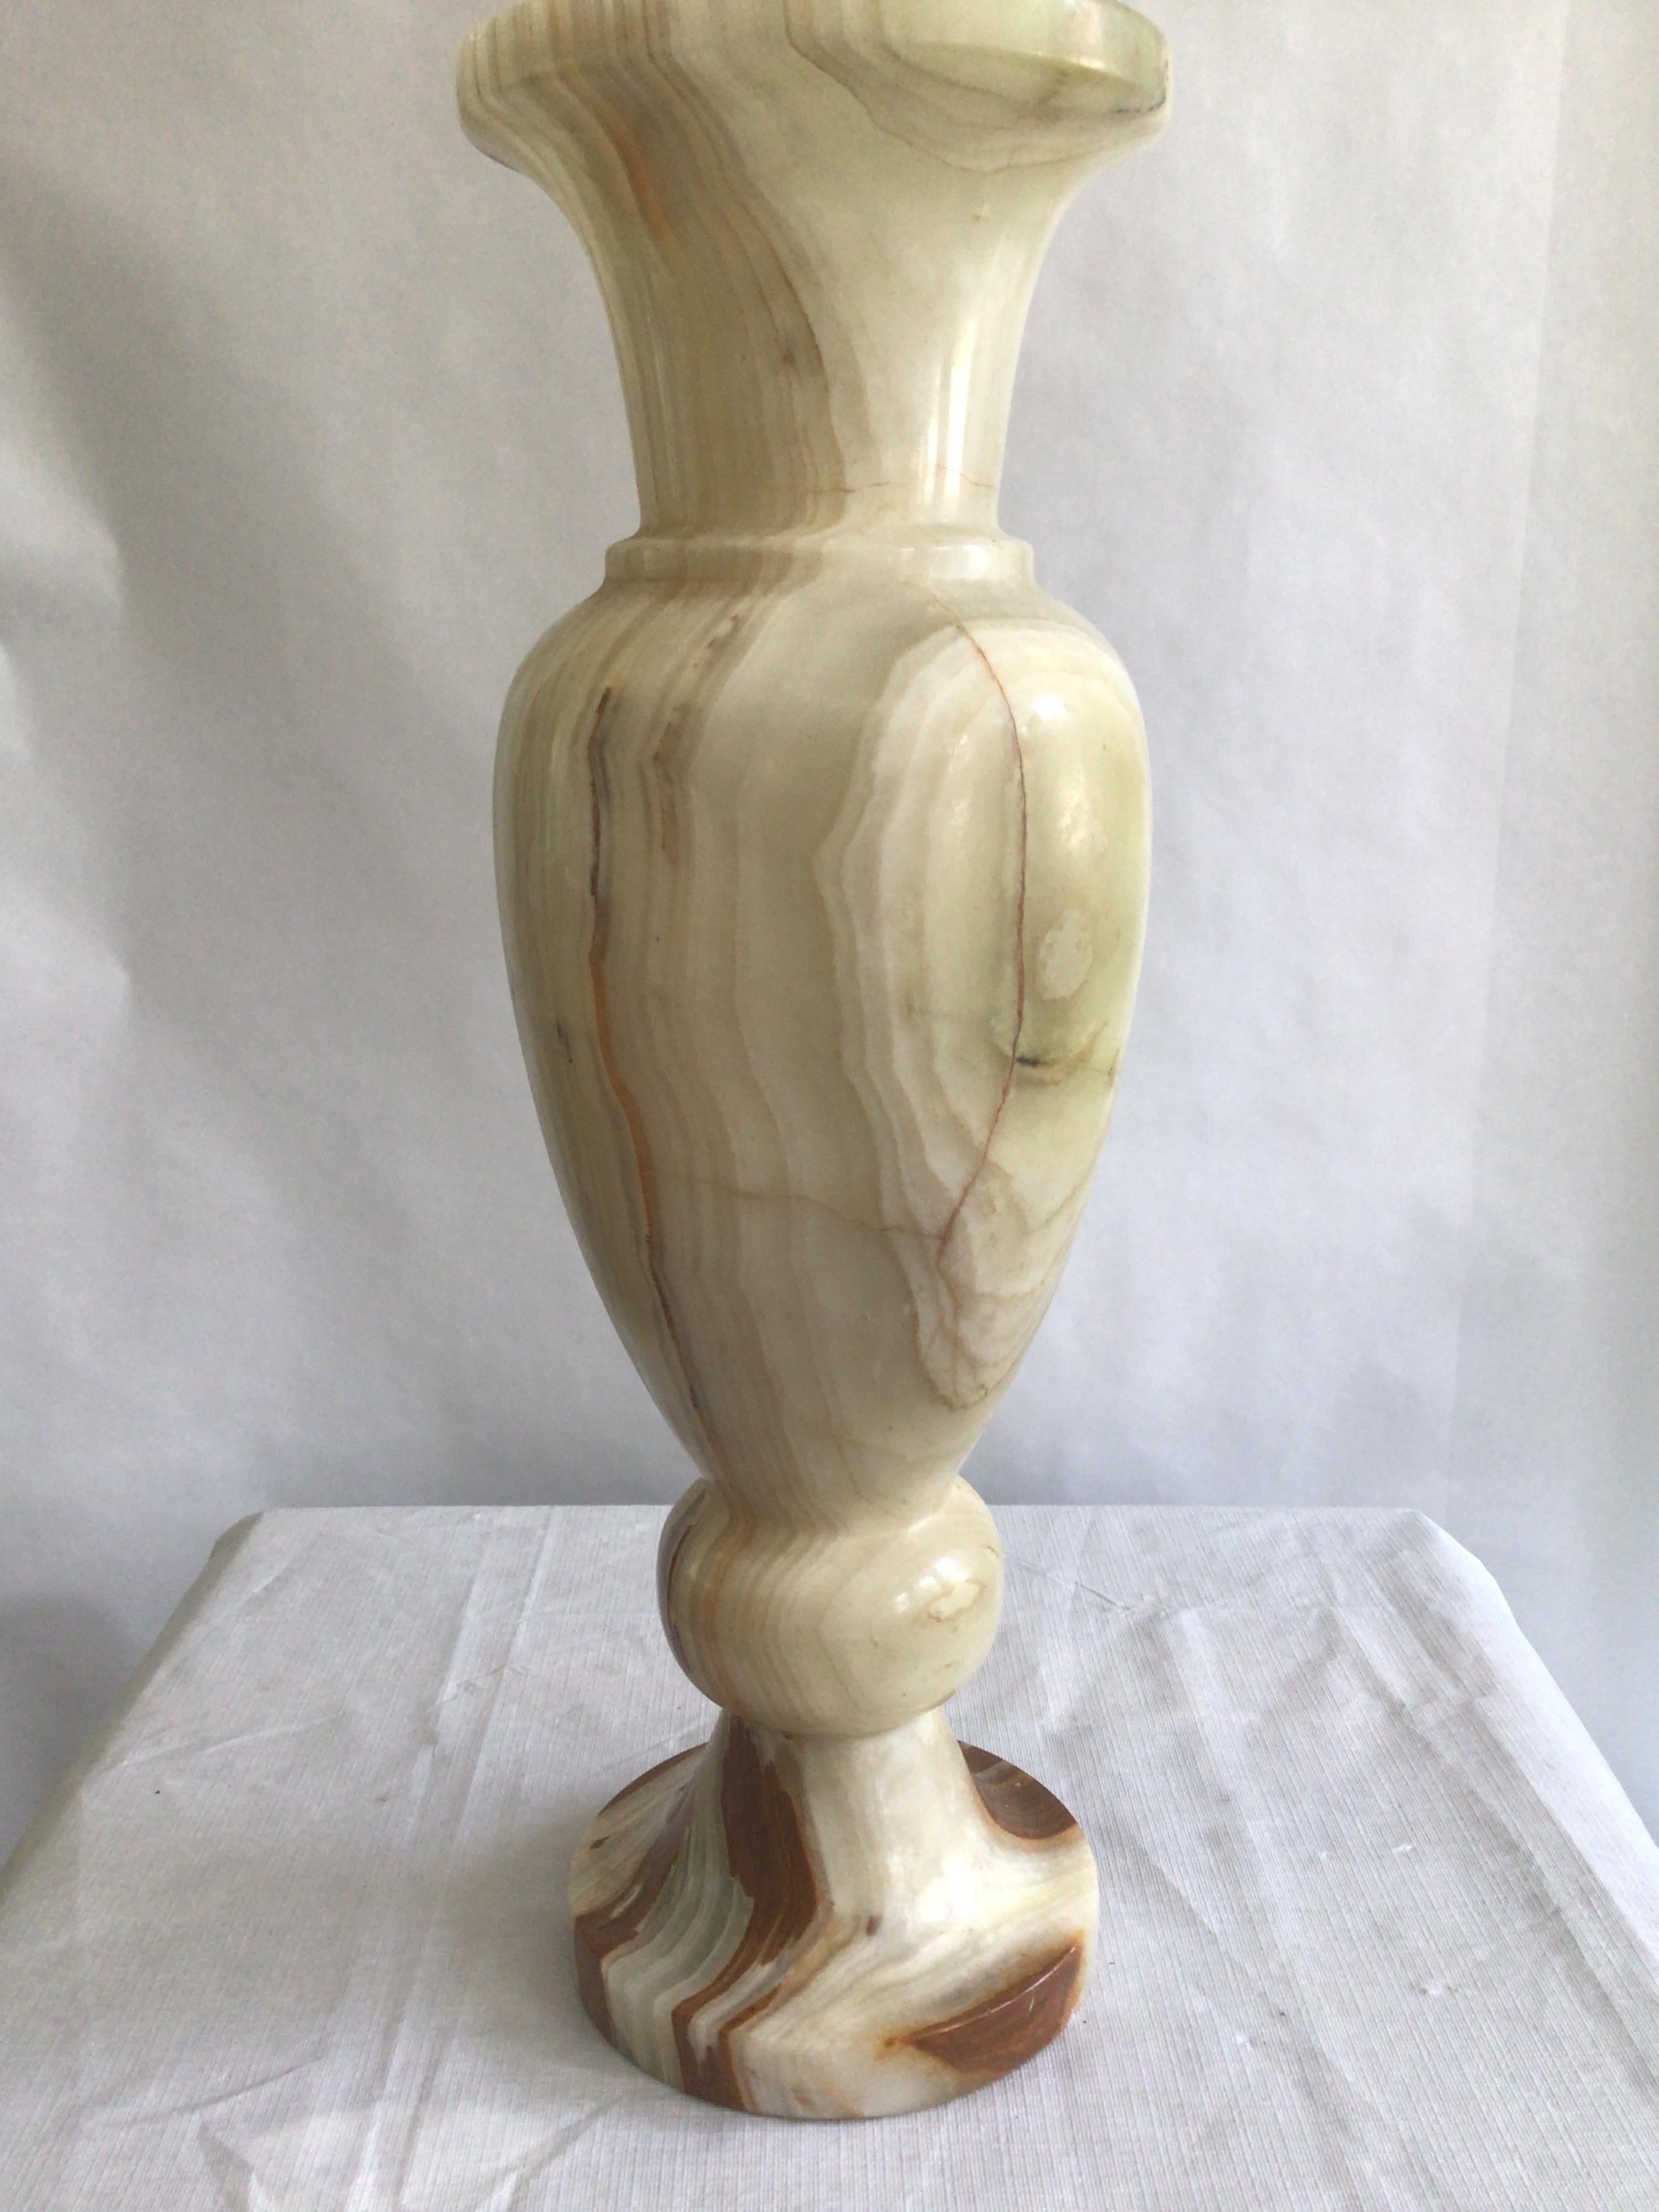 1960s Carved Onyx Urn Vase
This elegant large vase is composed of layers of cream and earthy green onyx banding. With contrasting circular splashes of red and brown running down one of its sides, it has been hand-carved and polished